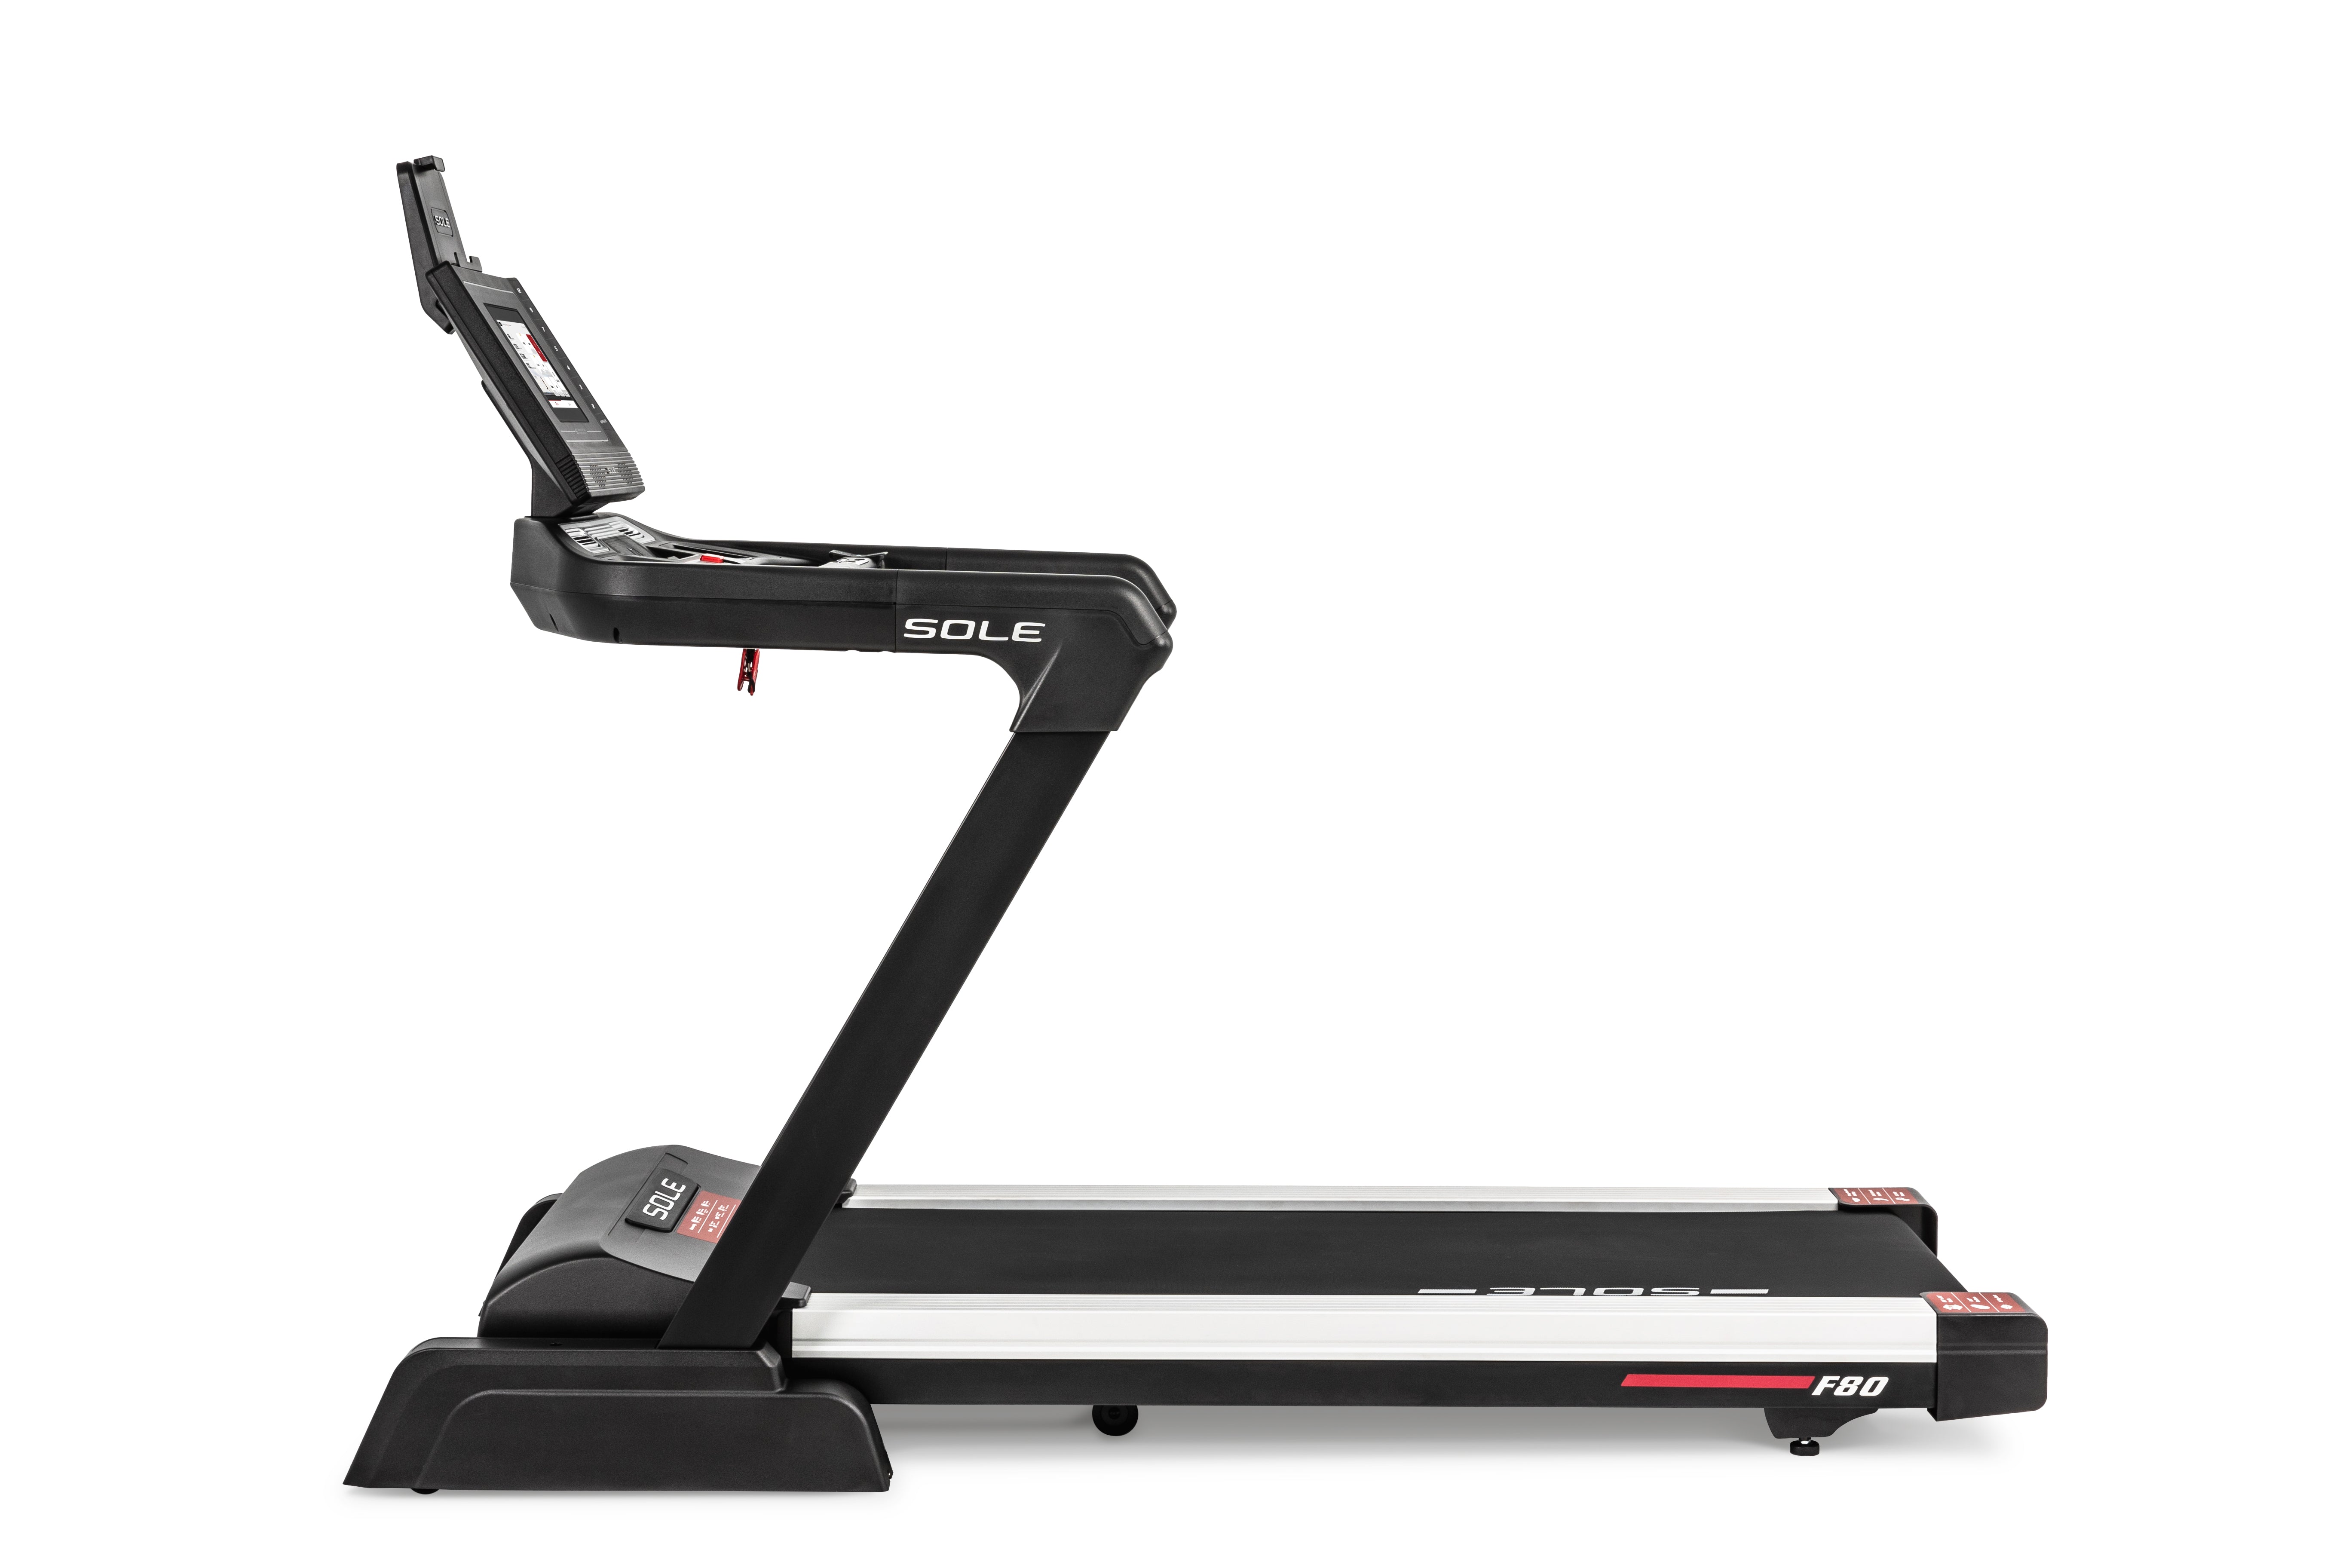 Front angle view of the Sole F80 treadmill showcasing its digital console, sturdy handrails, black frame with "F80" branding, and a spacious running deck with SOLE logo at the base.